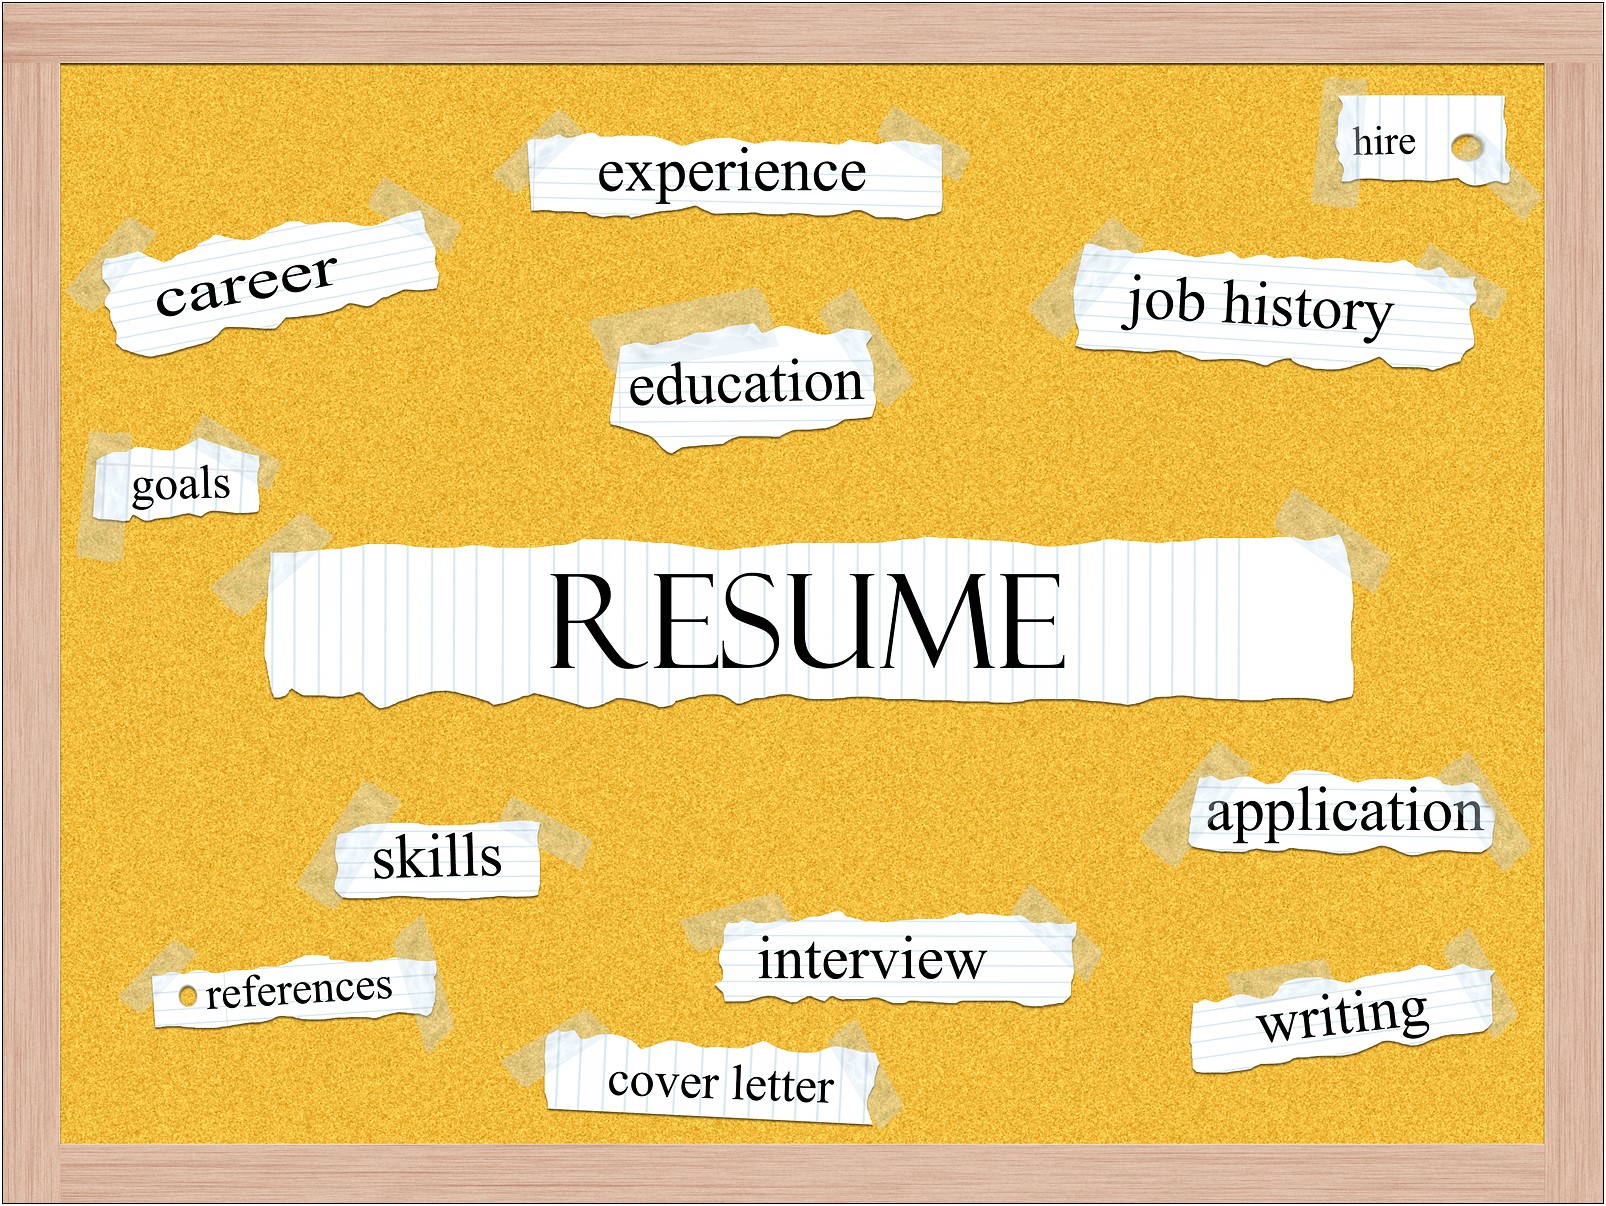 Past Or Present Tense For Resume Skills